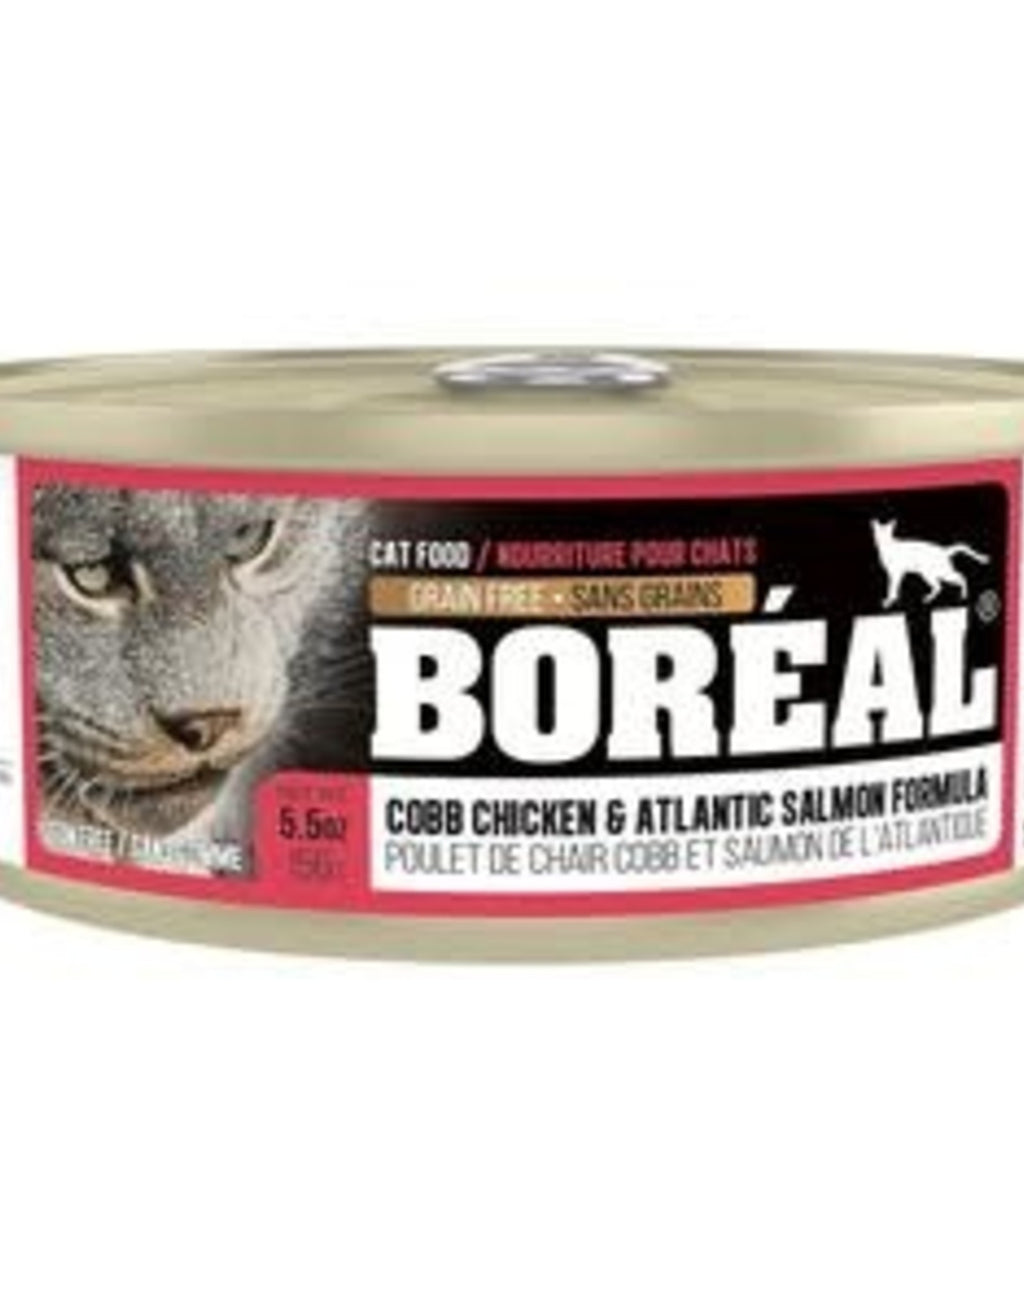 Boreal Cat Cans 156g